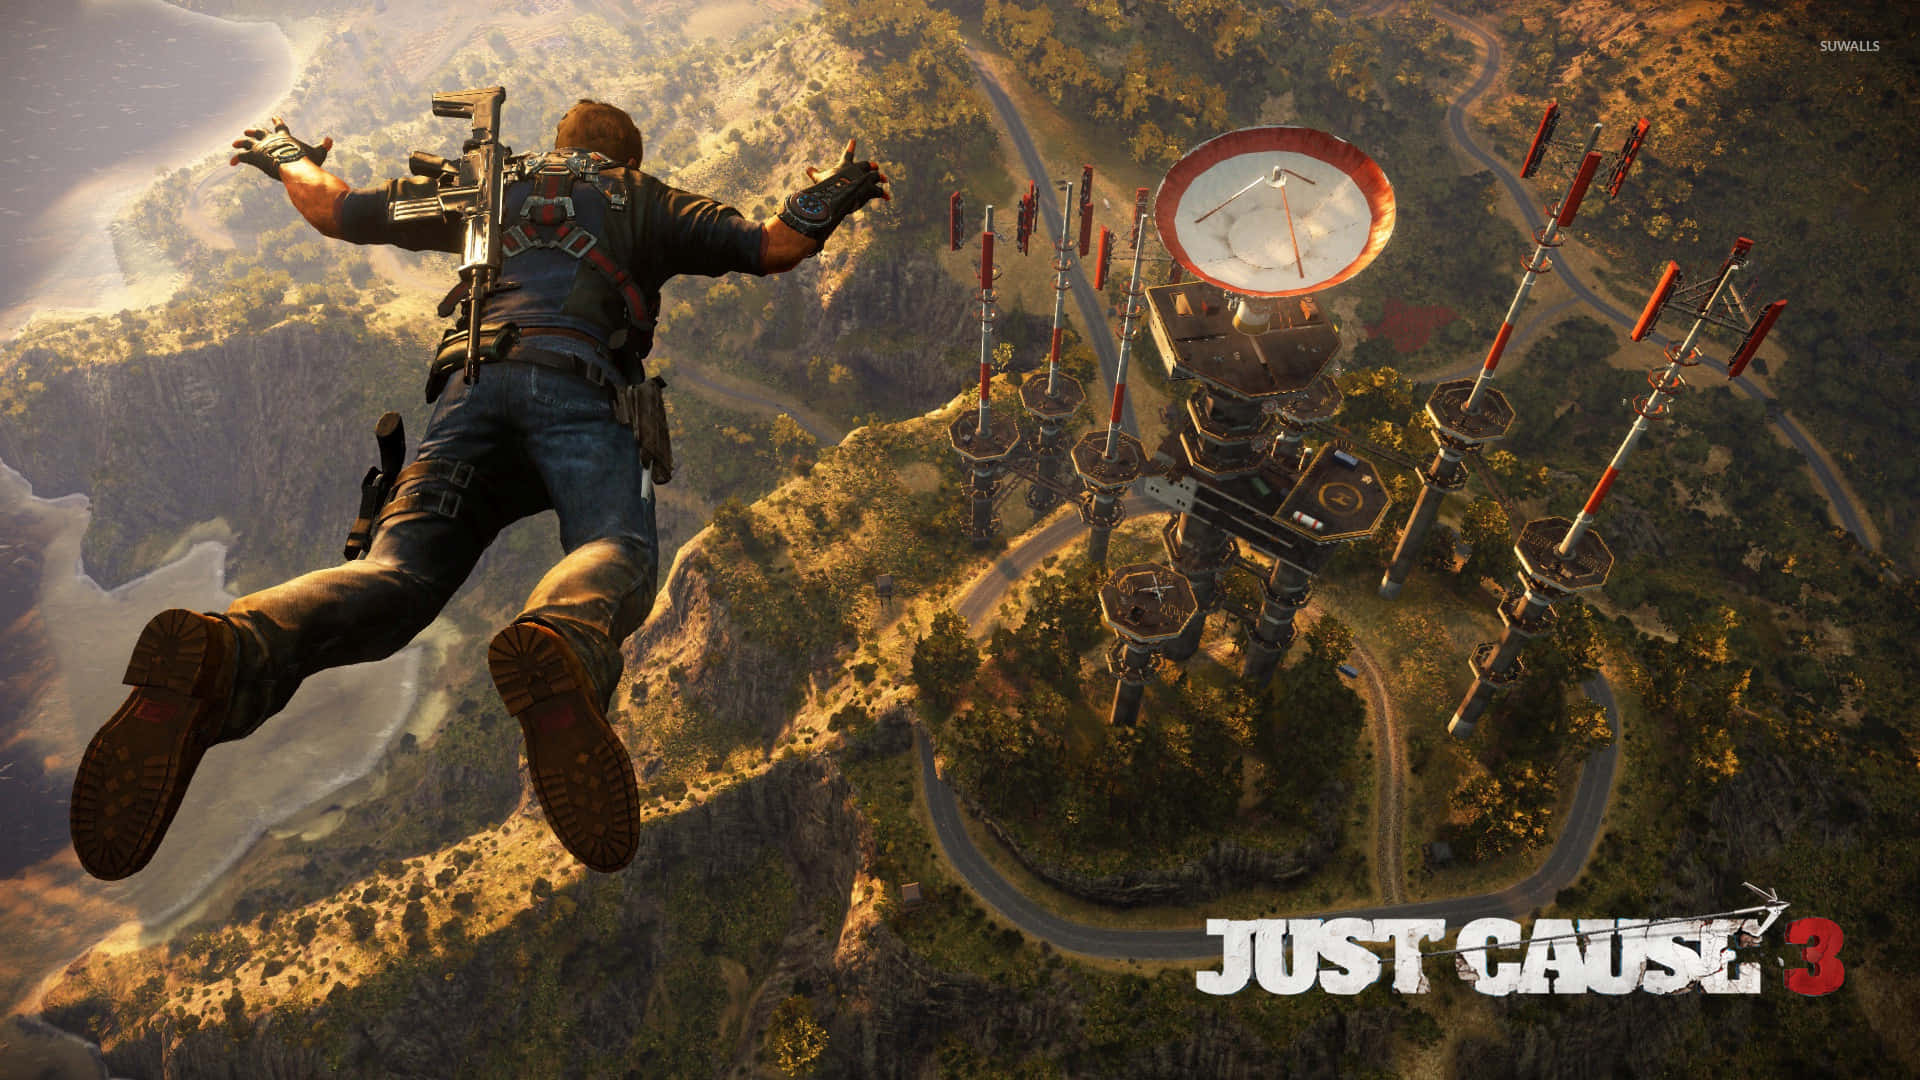 Explore and master a new way to create chaos in Just Cause 4